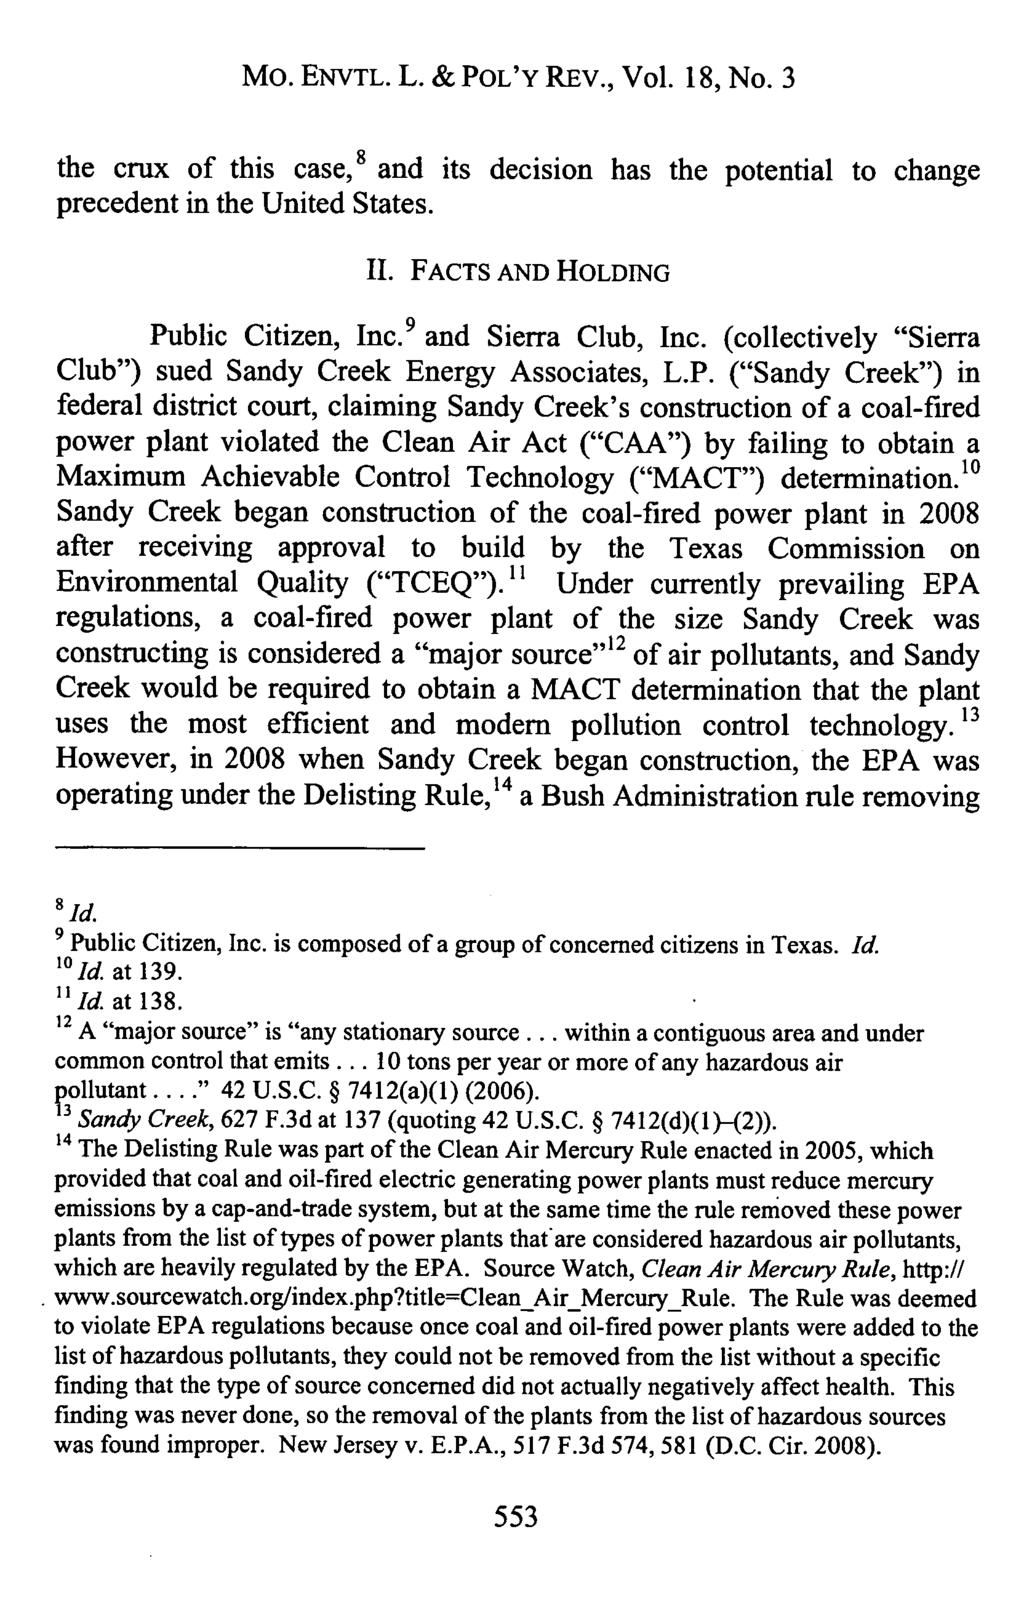 Mo. ENVTL. L. & POL'Y REV., Vol. 18, No. 3 the crux of this case, 8 and its decision has the potential to change precedent in the United States. II. FACTS AND HOLDING Public Citizen, Inc.